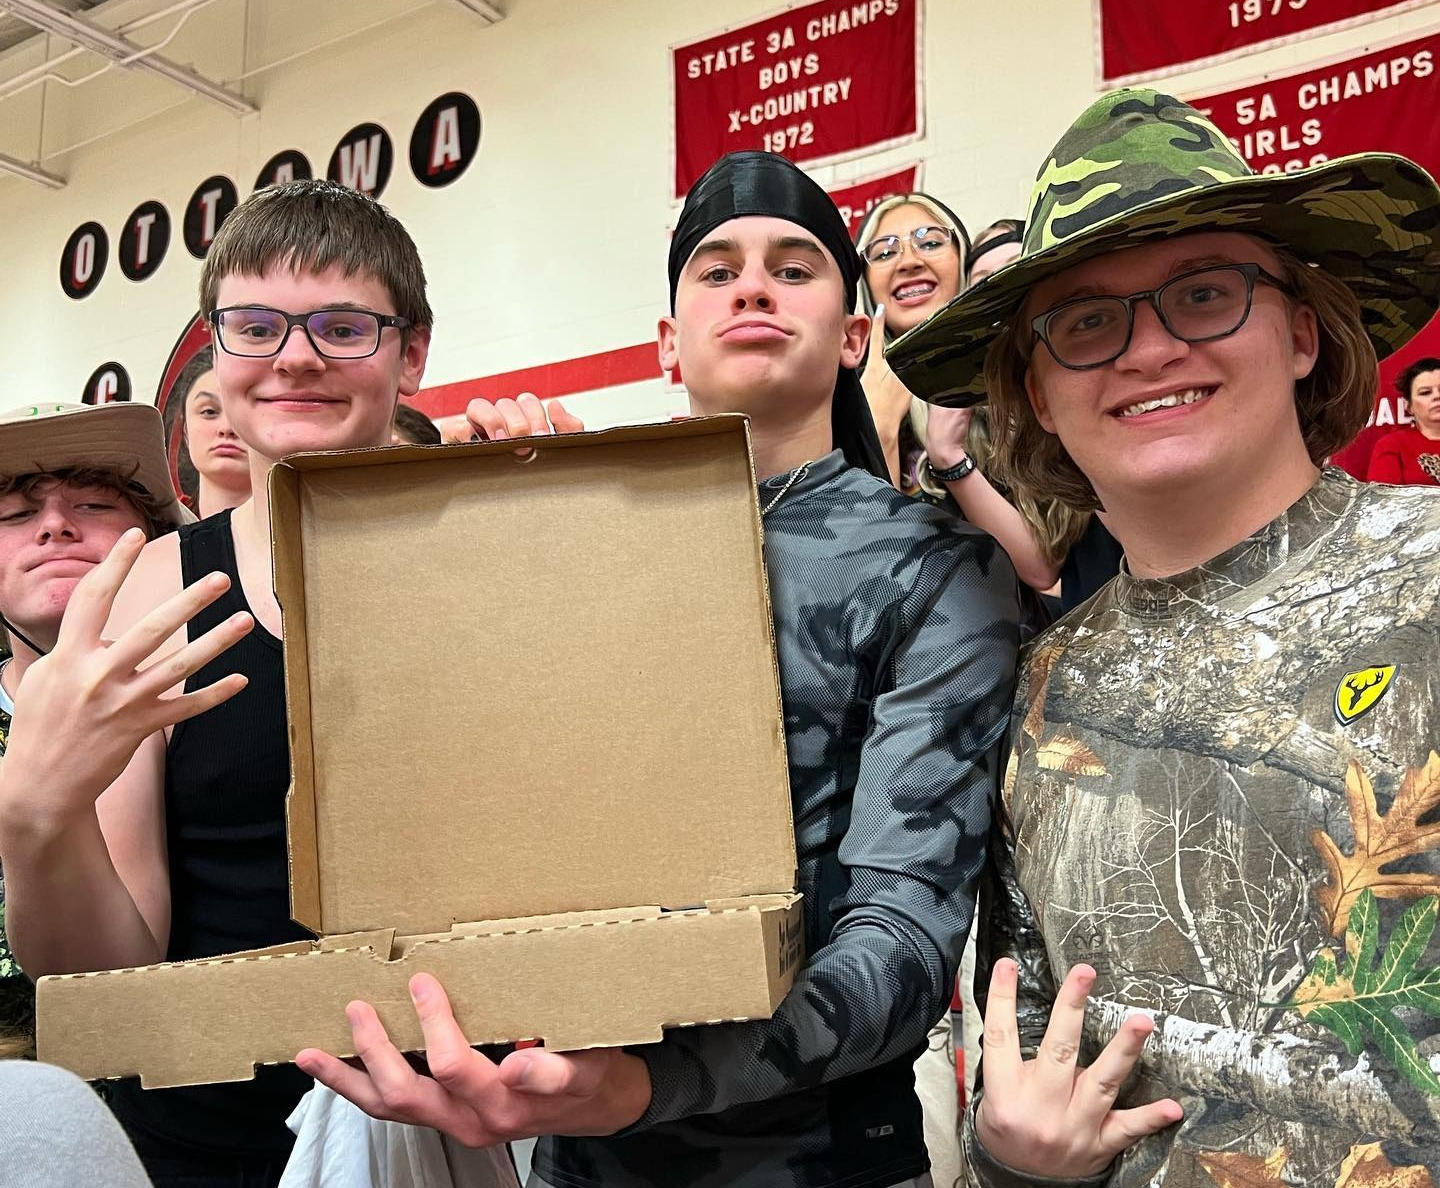 Pizza Time Fans of the Game